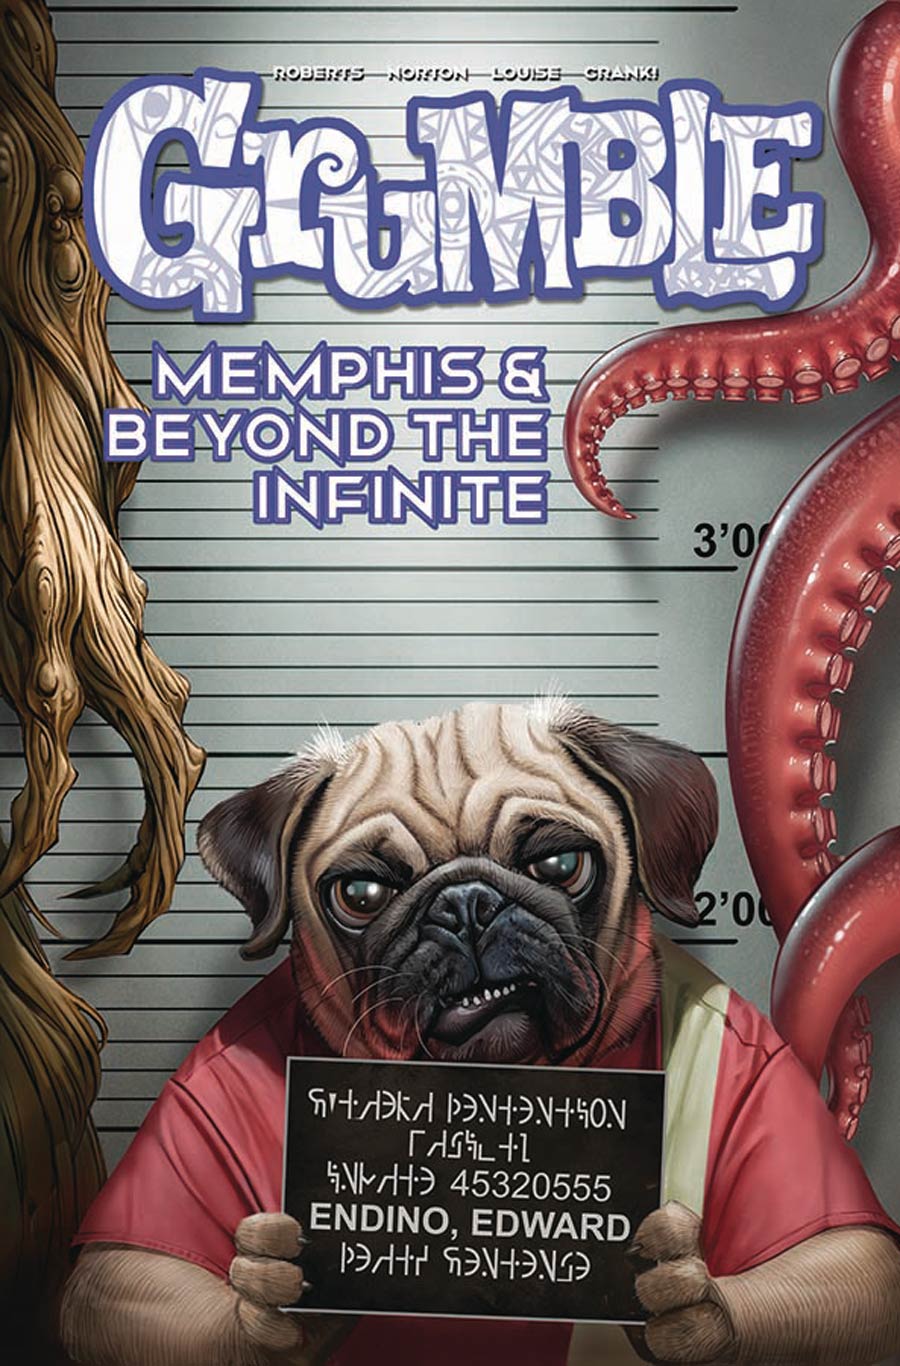 Grumble Vol 3 Memphis And Beyond The Infinite TP